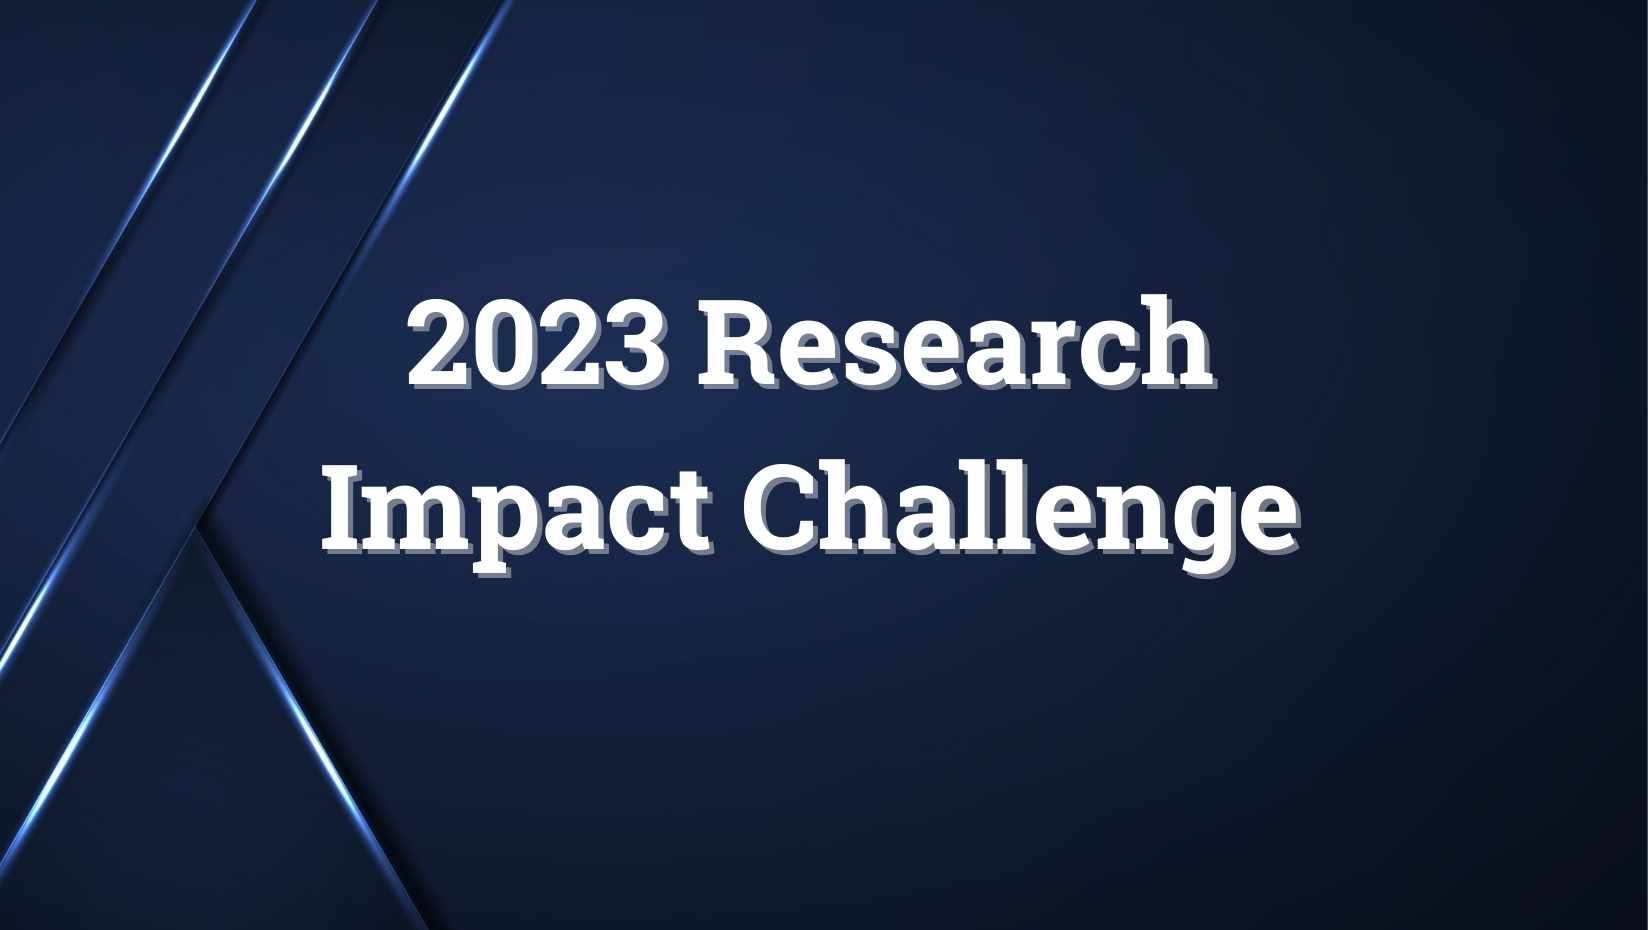 2023 Research Impact Challenge graphic